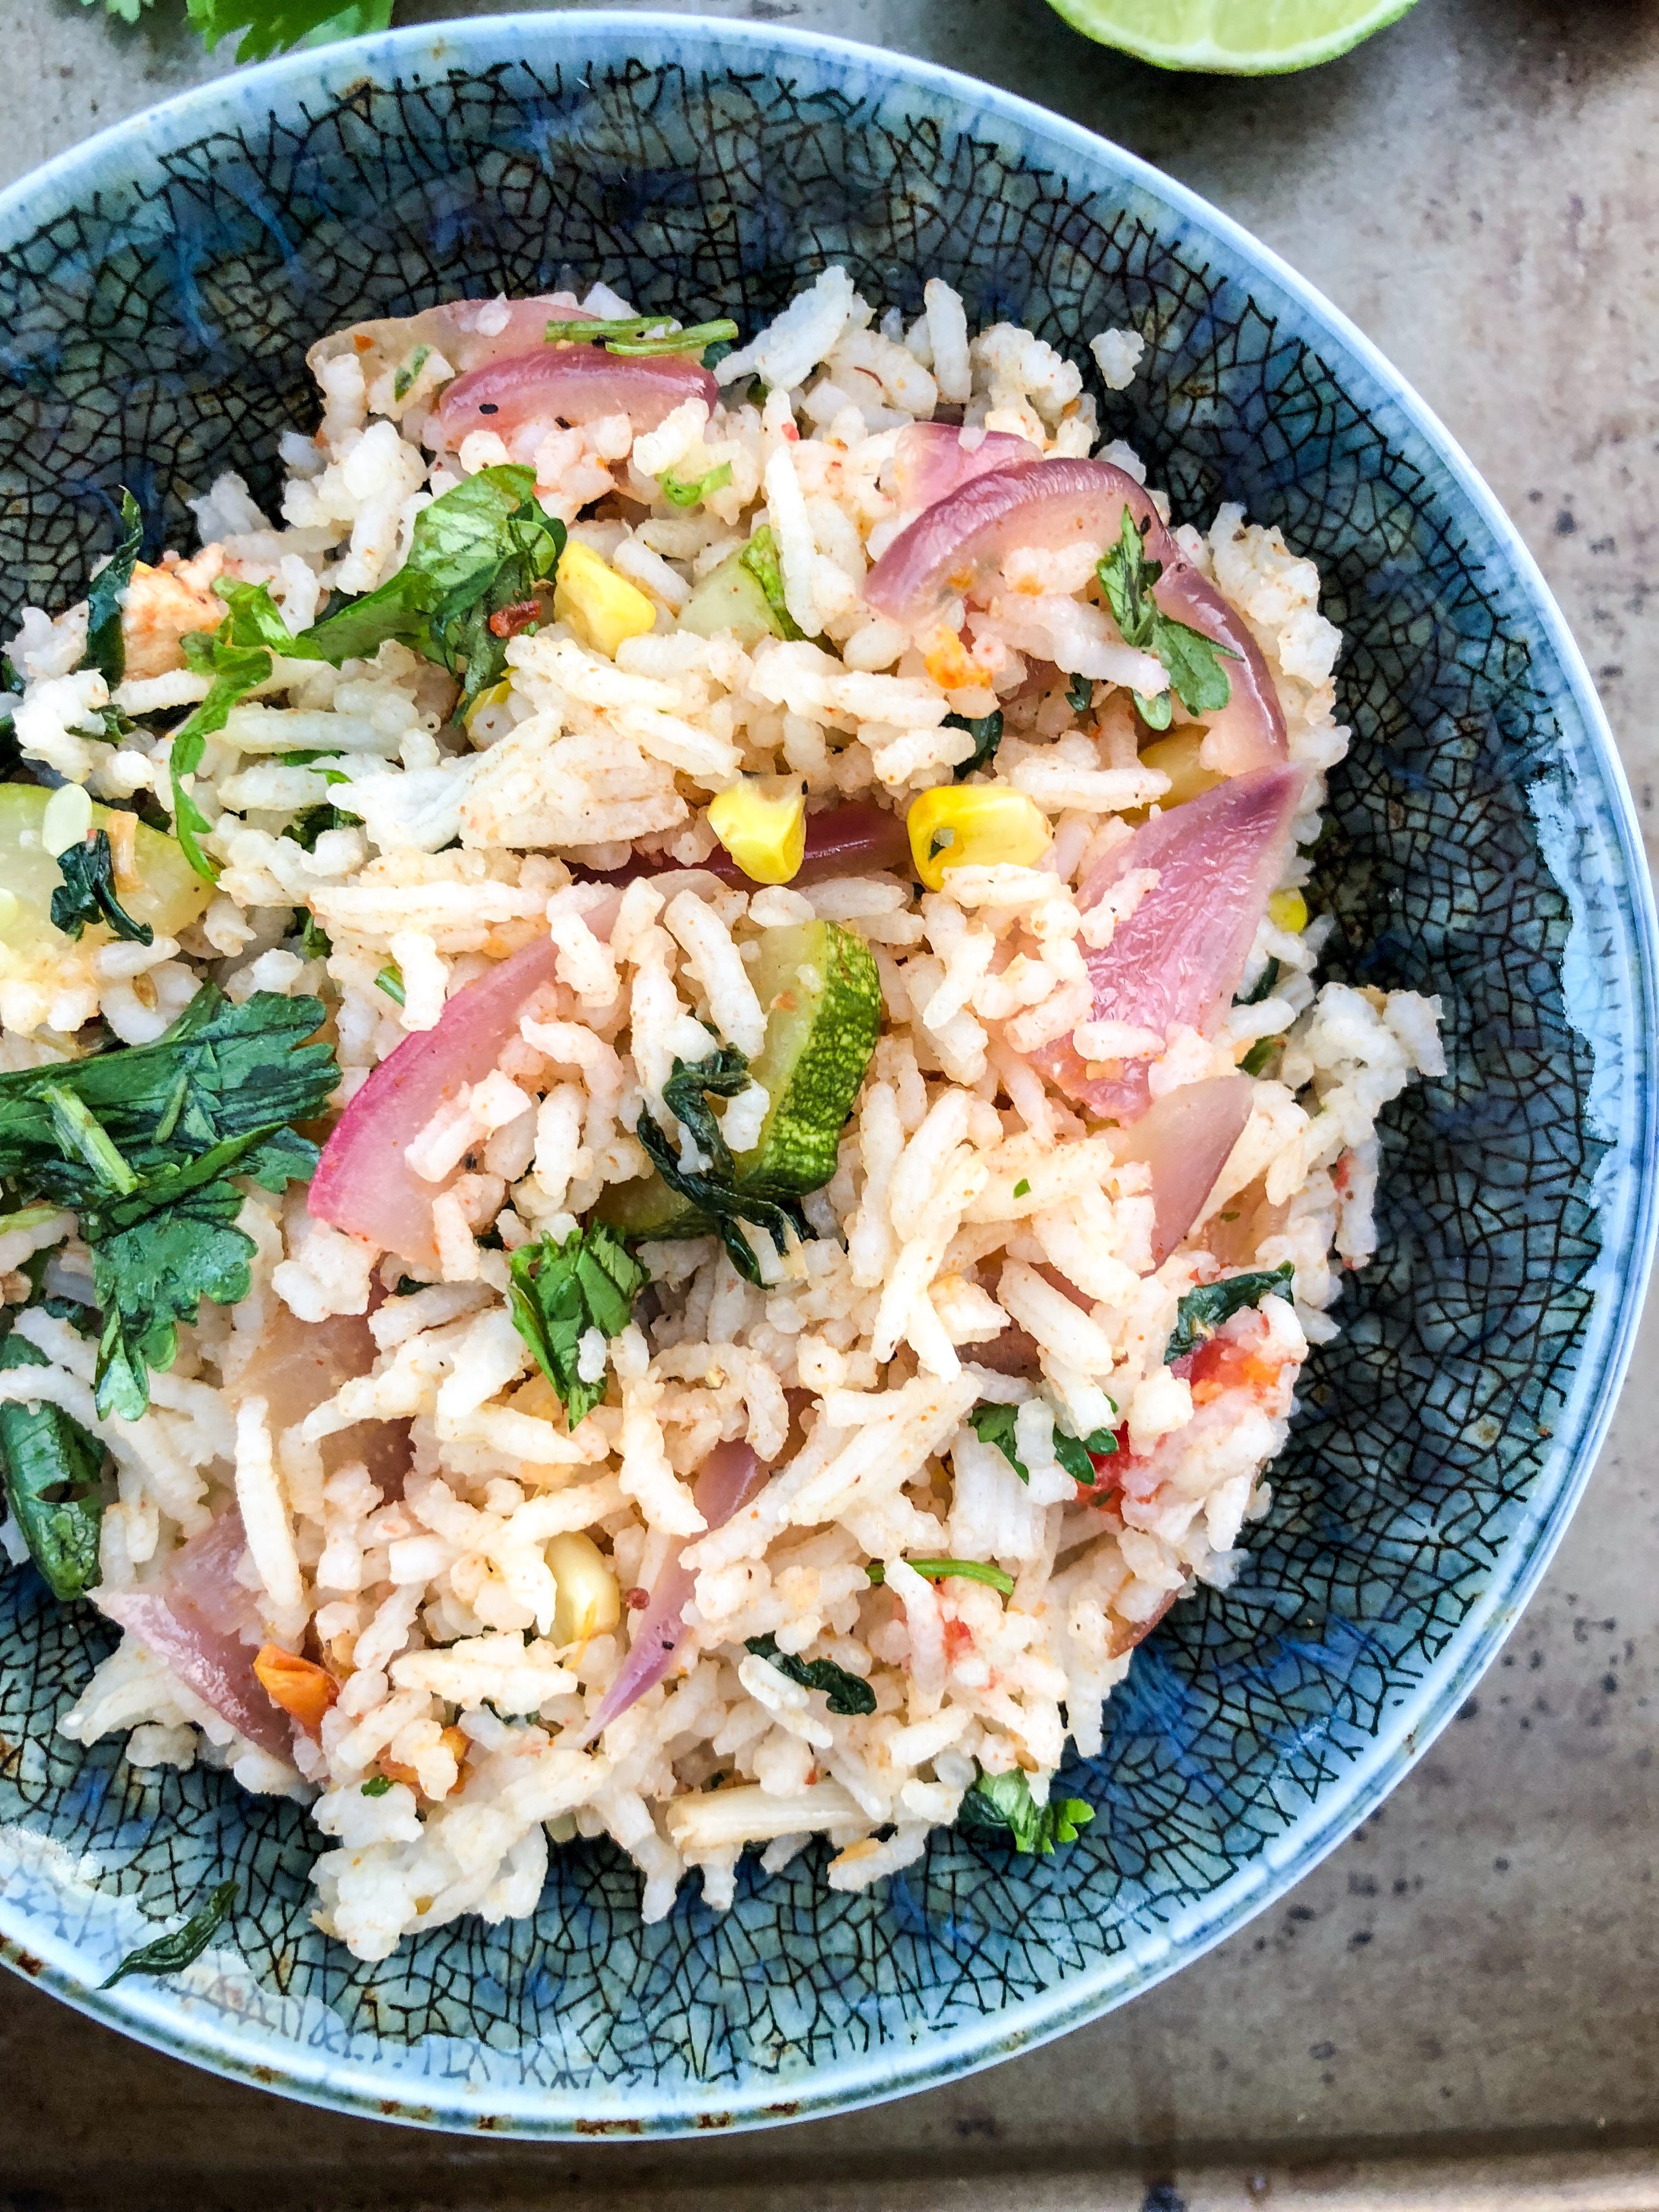 Indian style vegetable fried rice made using leftover cooked rice